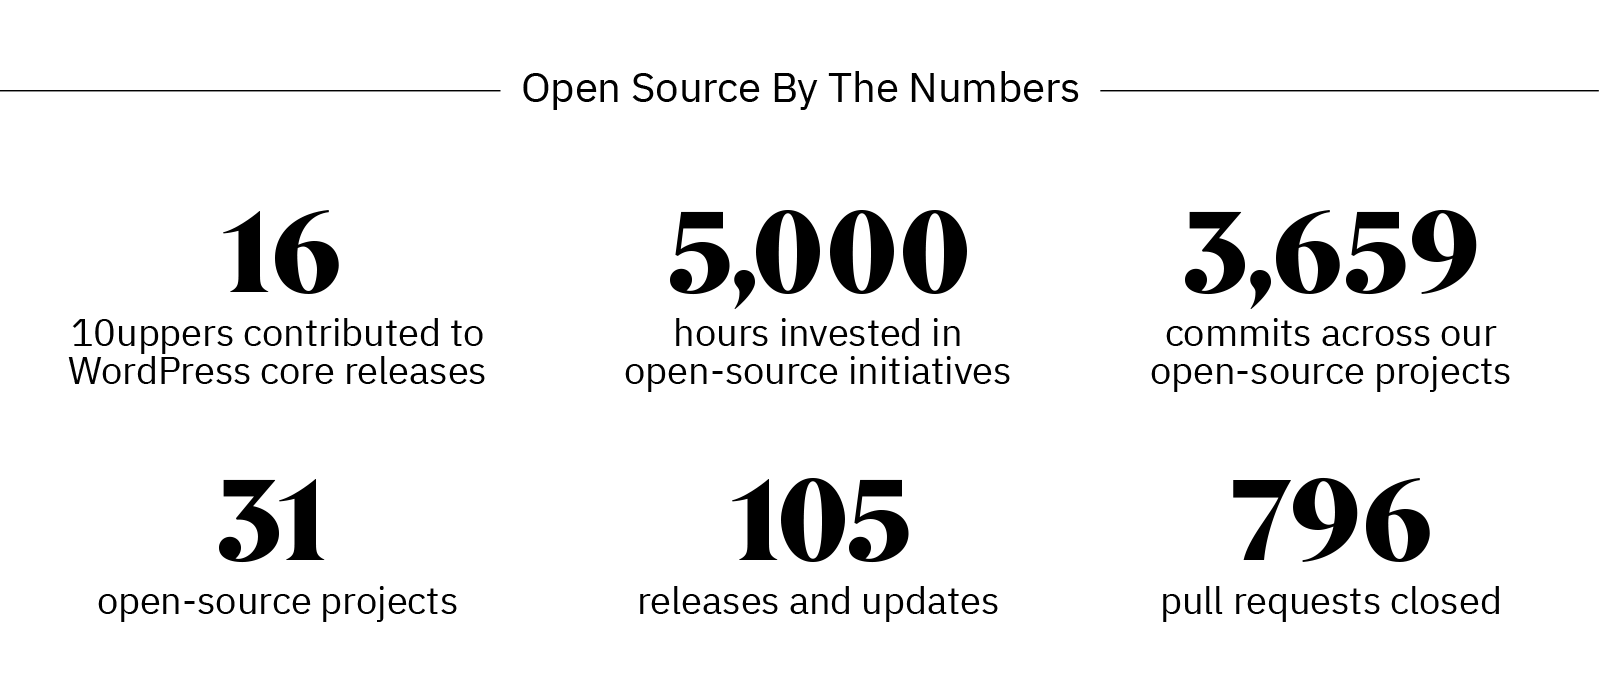 Open-Source By The Numbers